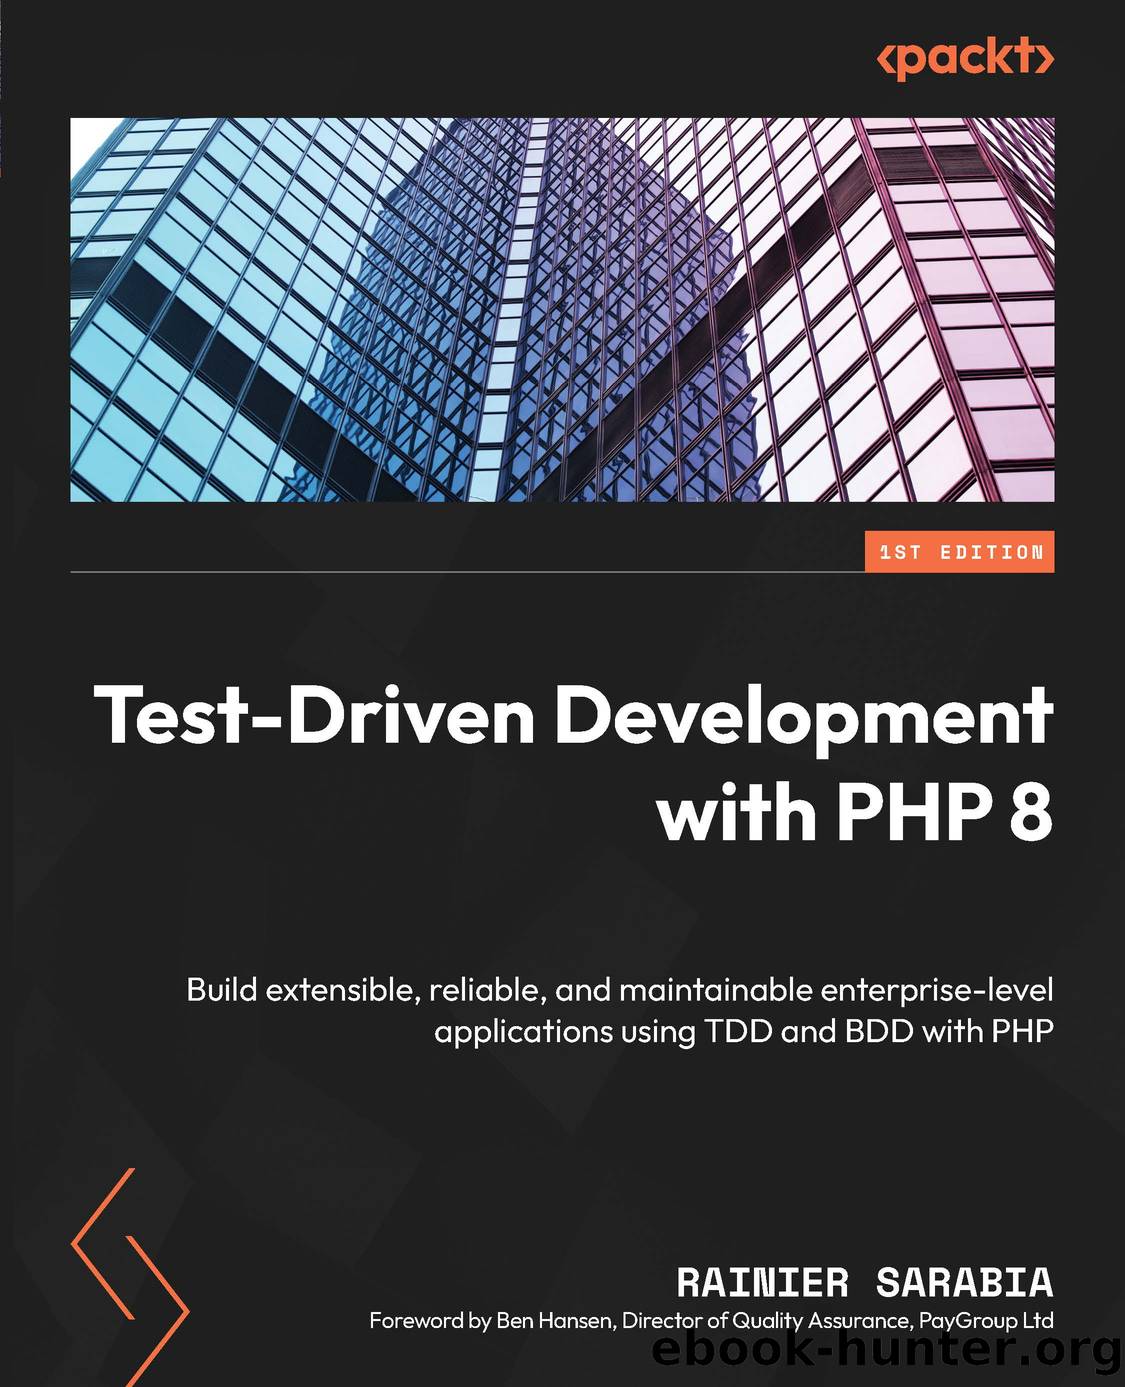 Test-Driven Development with PHP 8 by Rainier Sarabia